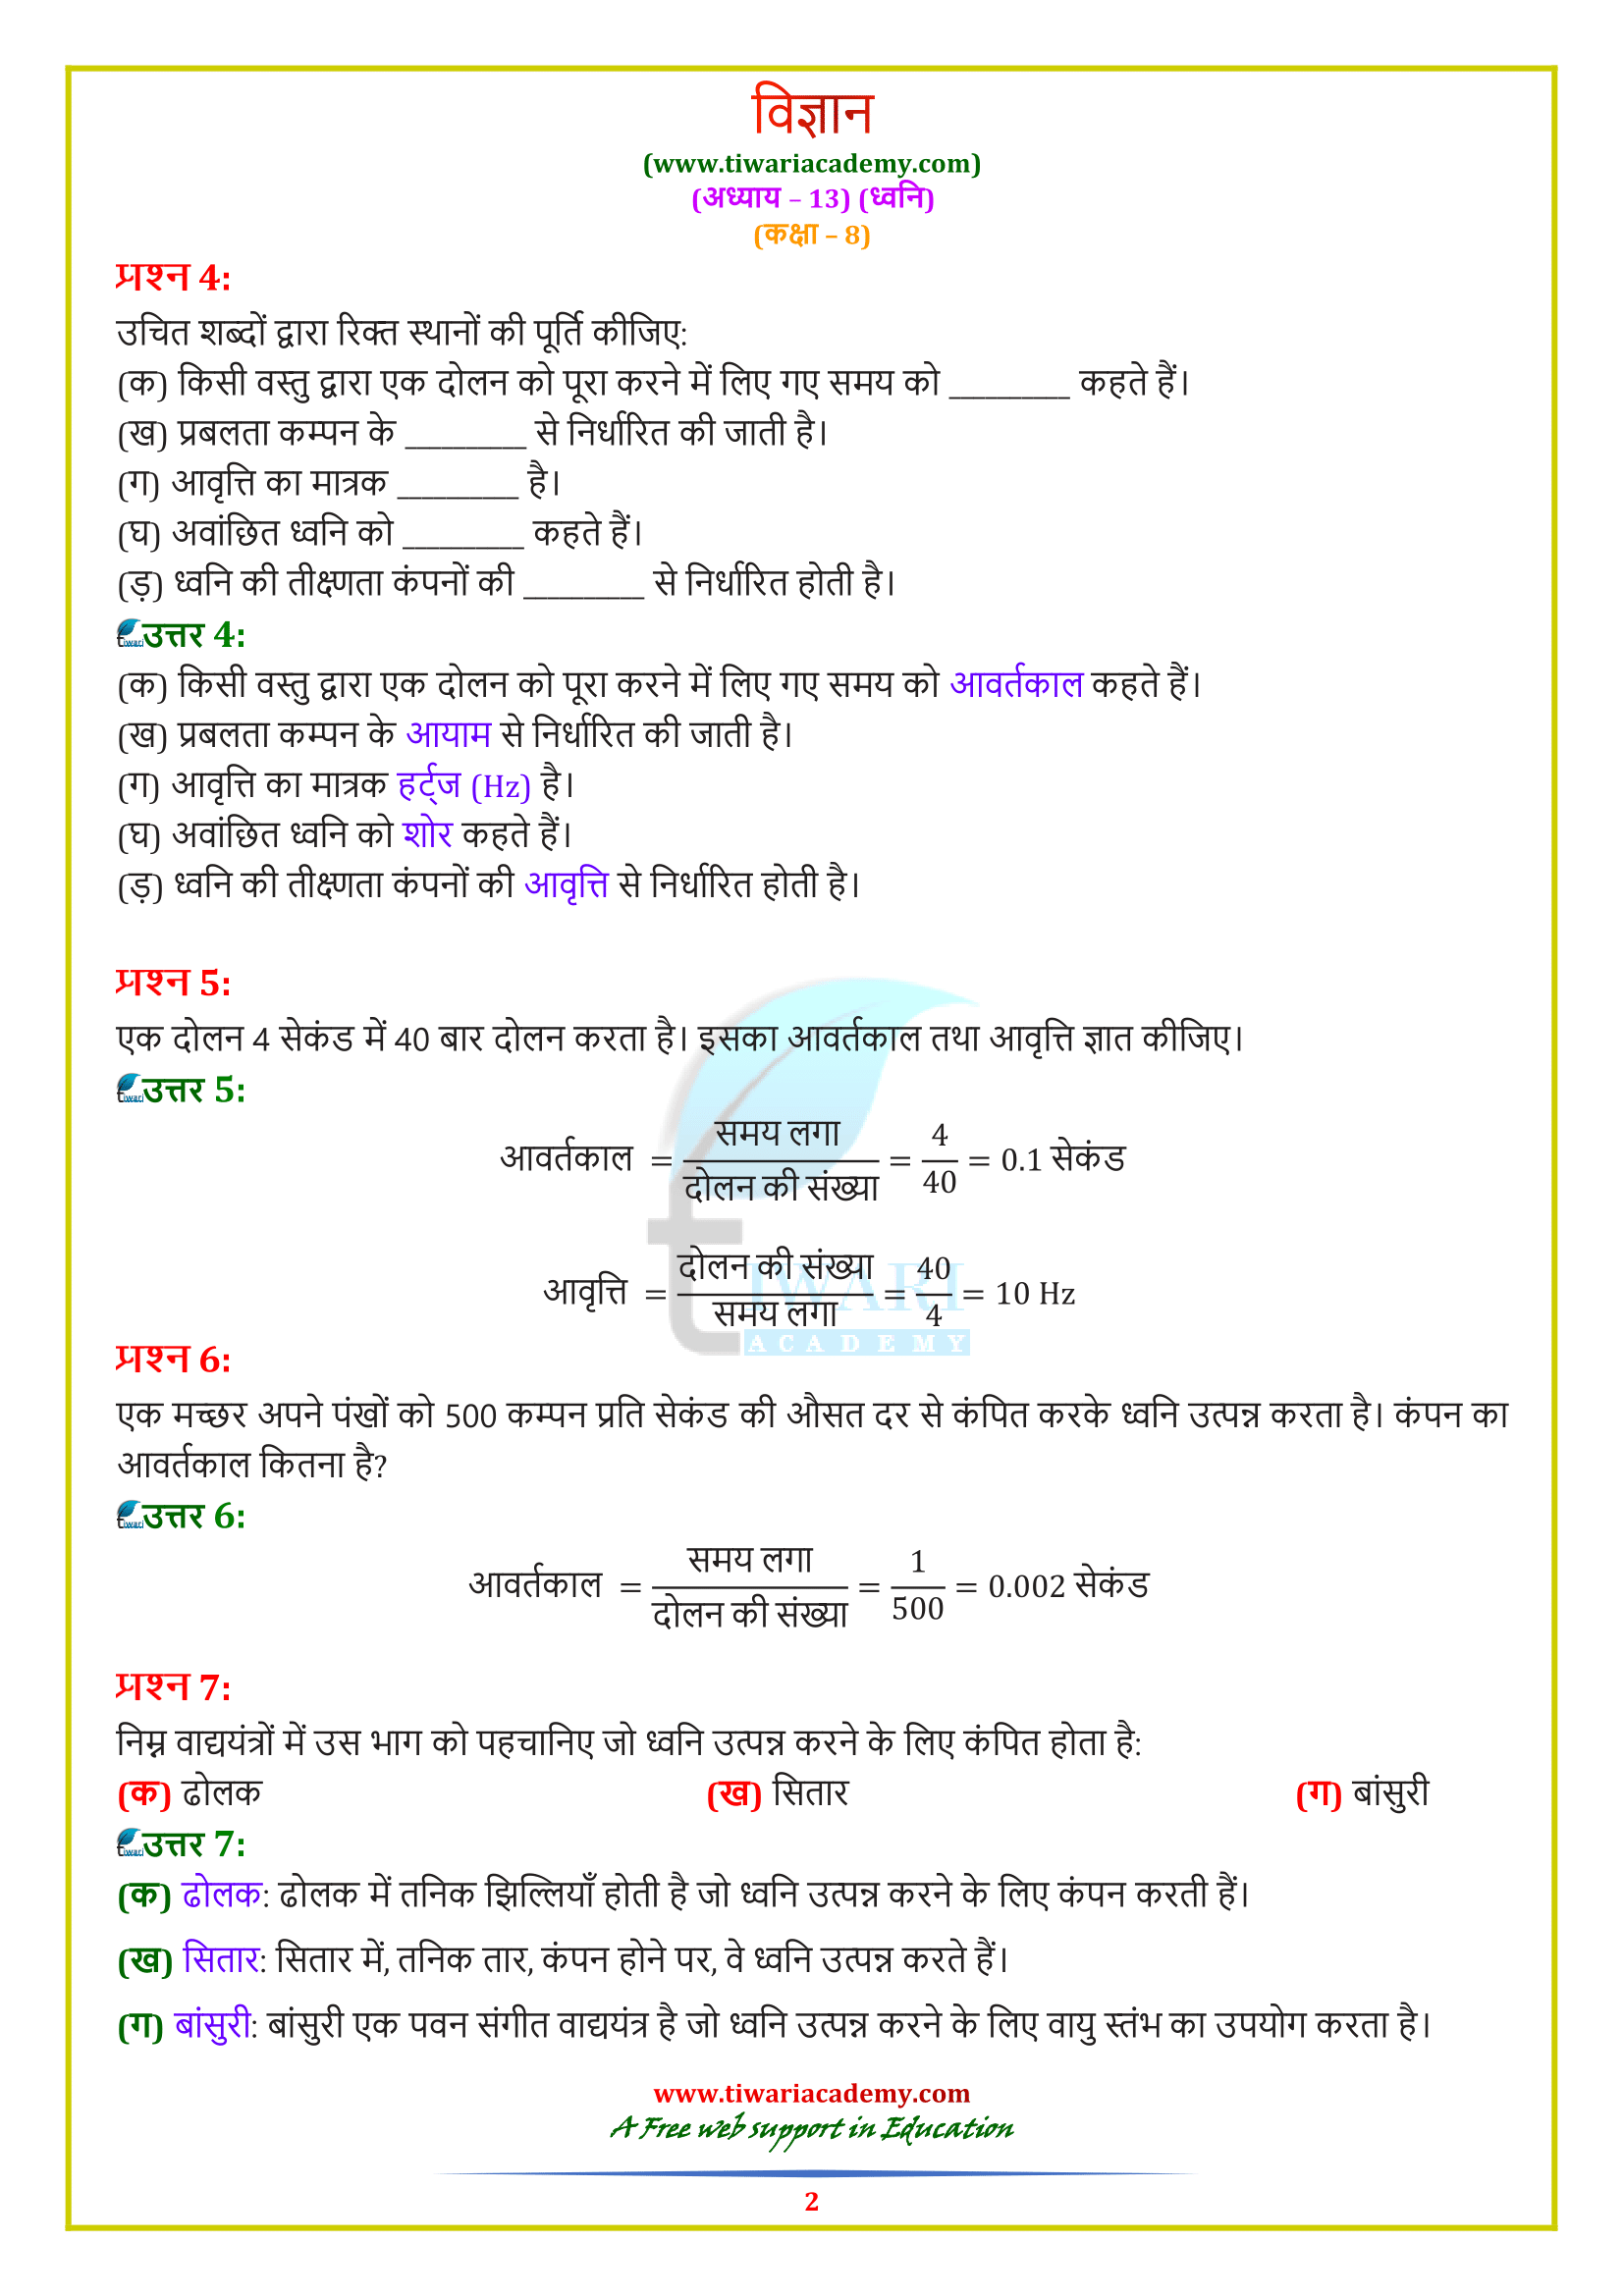 NCERT solutions for Class 8 Science Chapter 13 in Hindi Medium